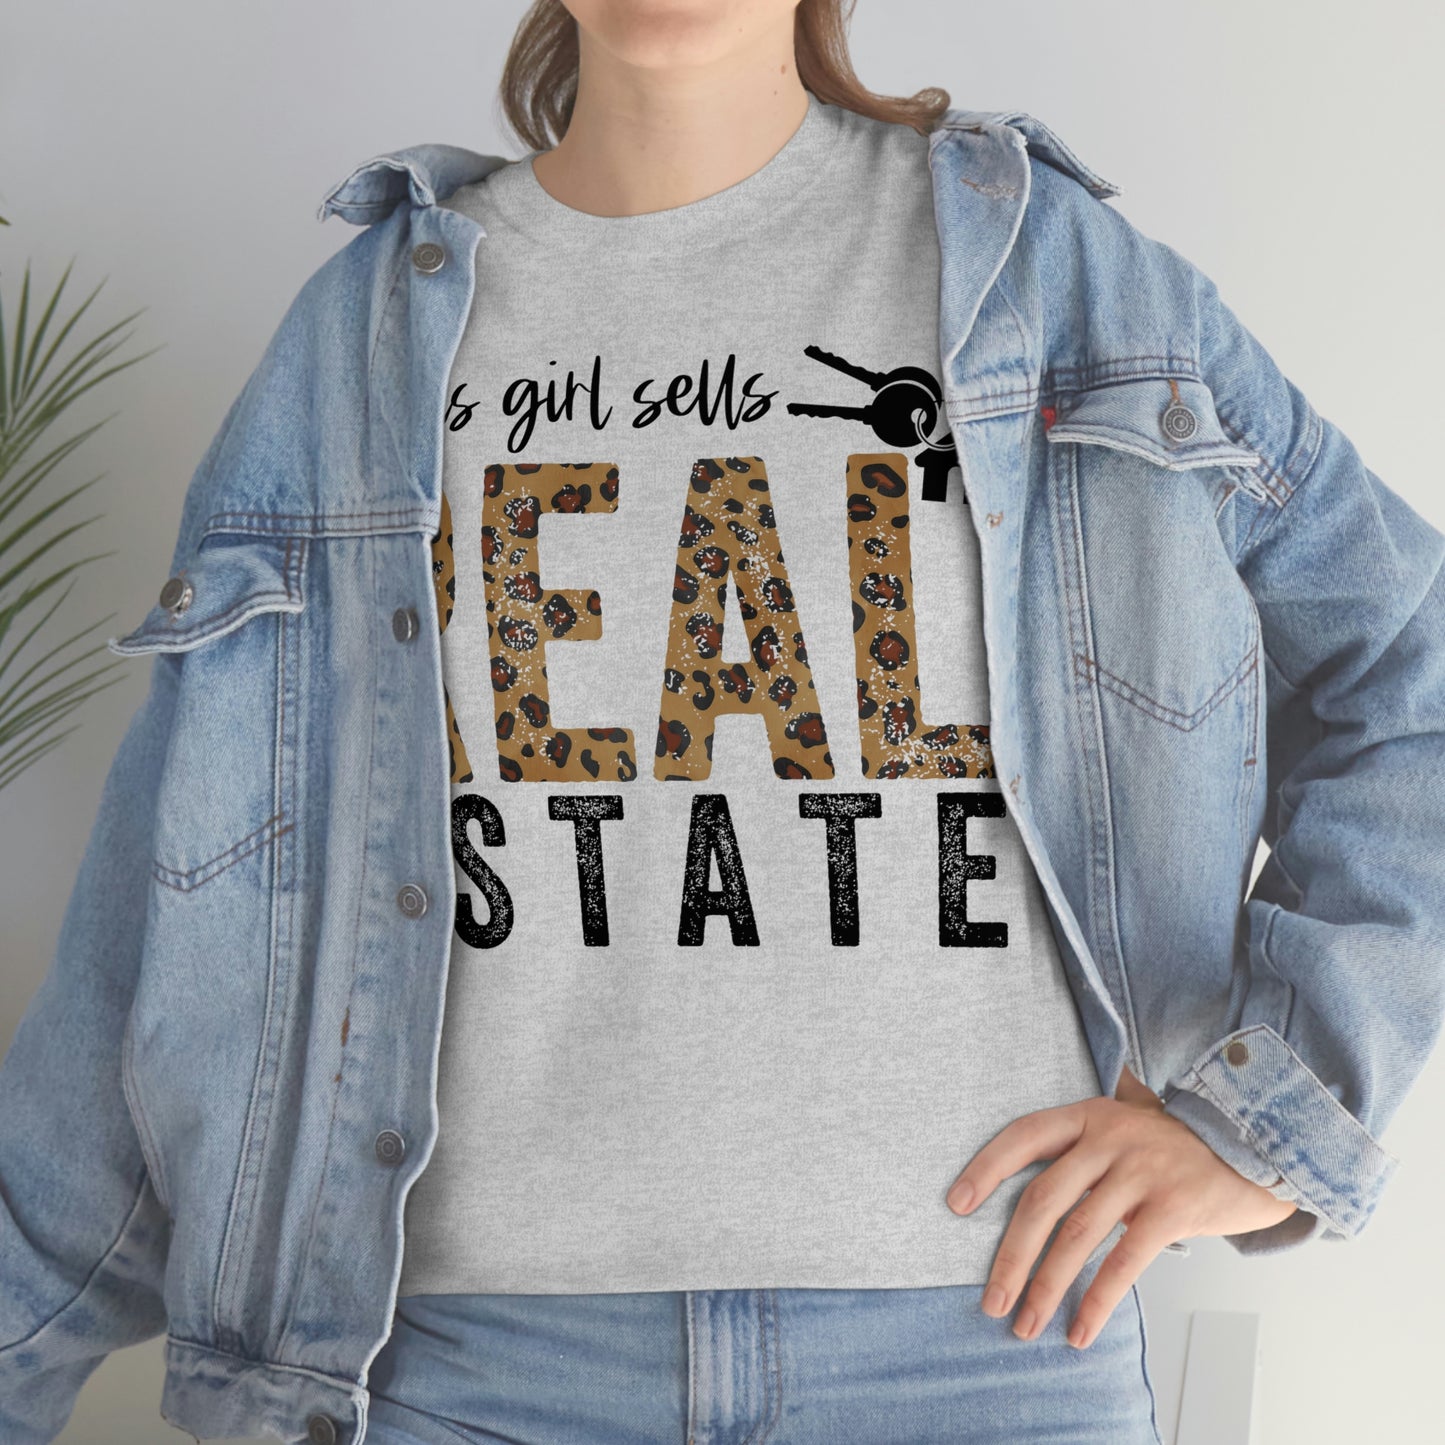 Women's Tee This Girl Sells Real Estate Heavy Cotton Tee